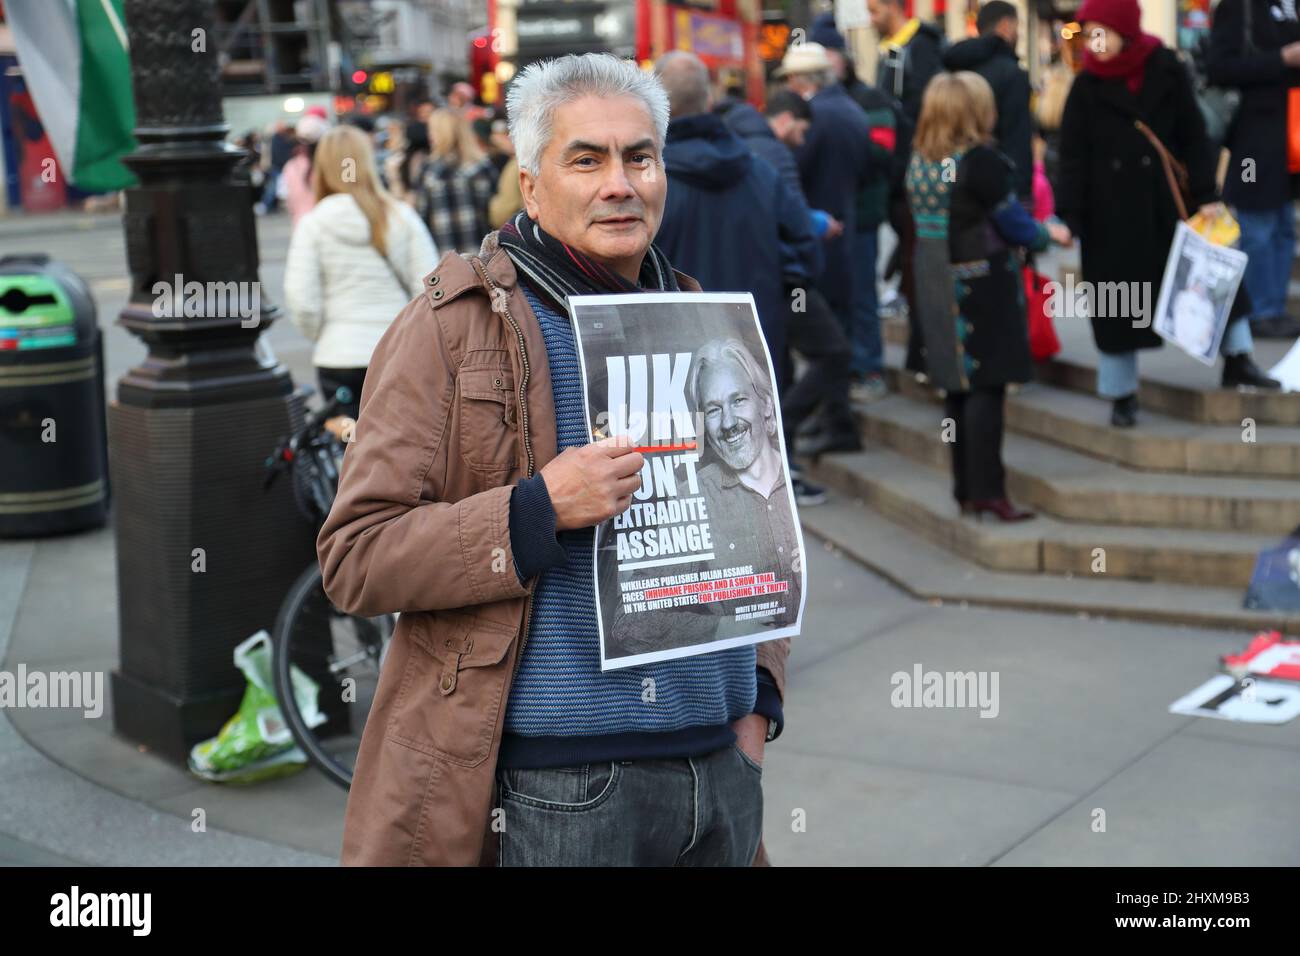 A small group of demonstrators holding placards campaign to free Julian Assange from prison at Piccadilly Circus, London, UK Stock Photo